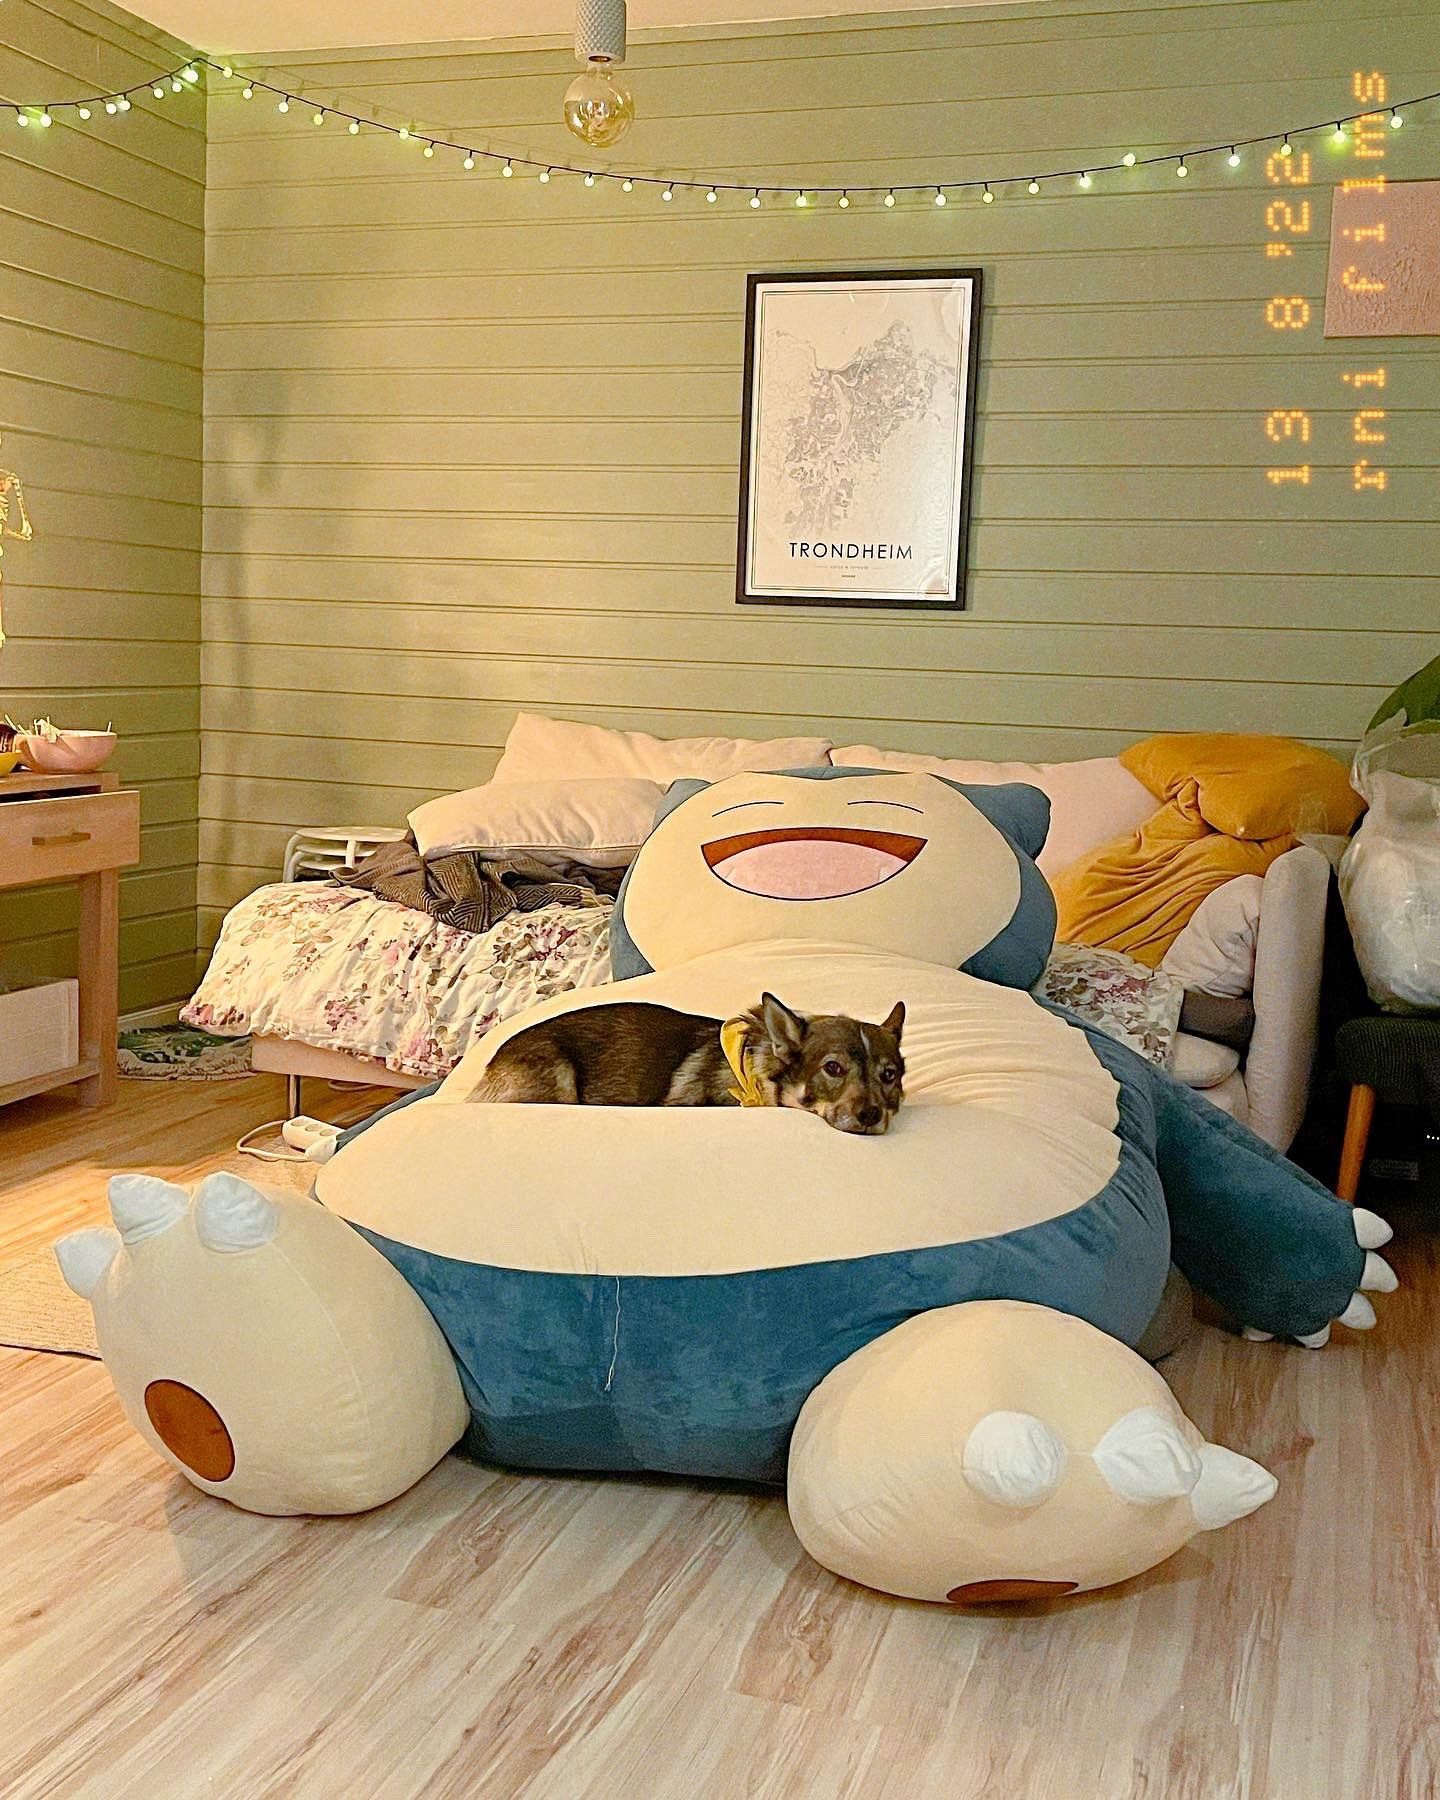 A dog relaxing on a giant plush Snorlax bean bag